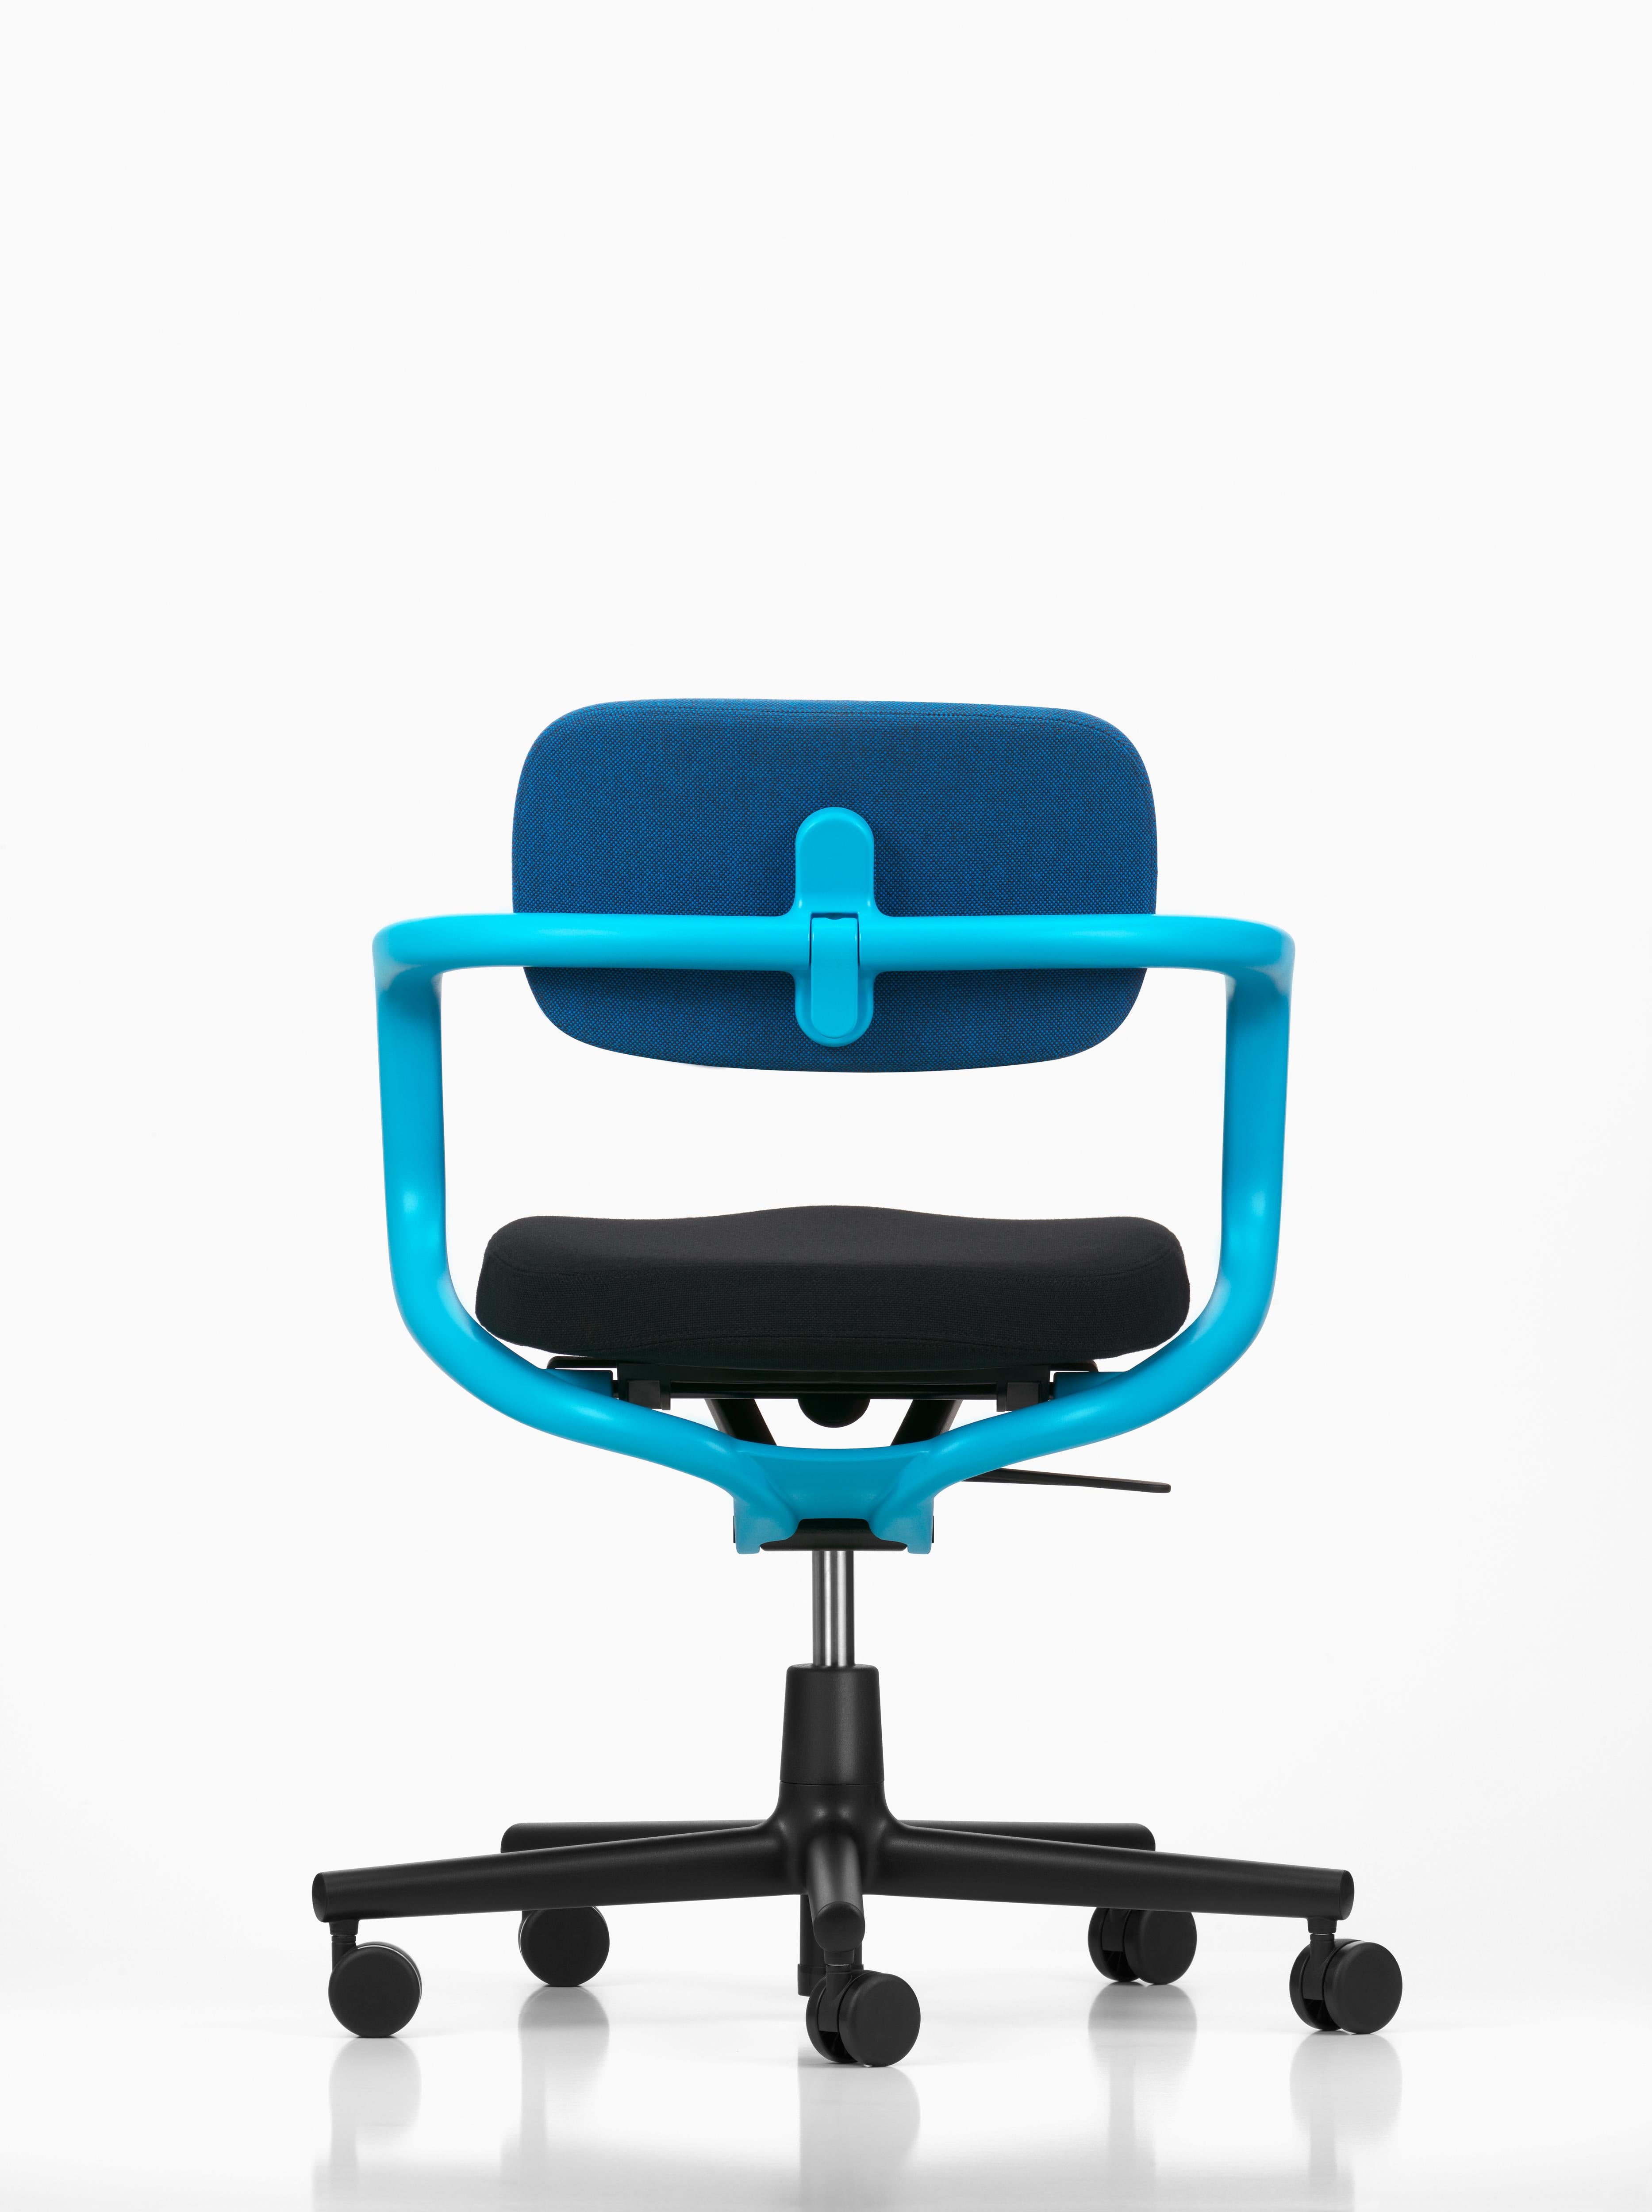 Swiss Vitra Allstar Chair in Blue & Moor Brown and Nero Hopsak by Konstantin Grcic For Sale